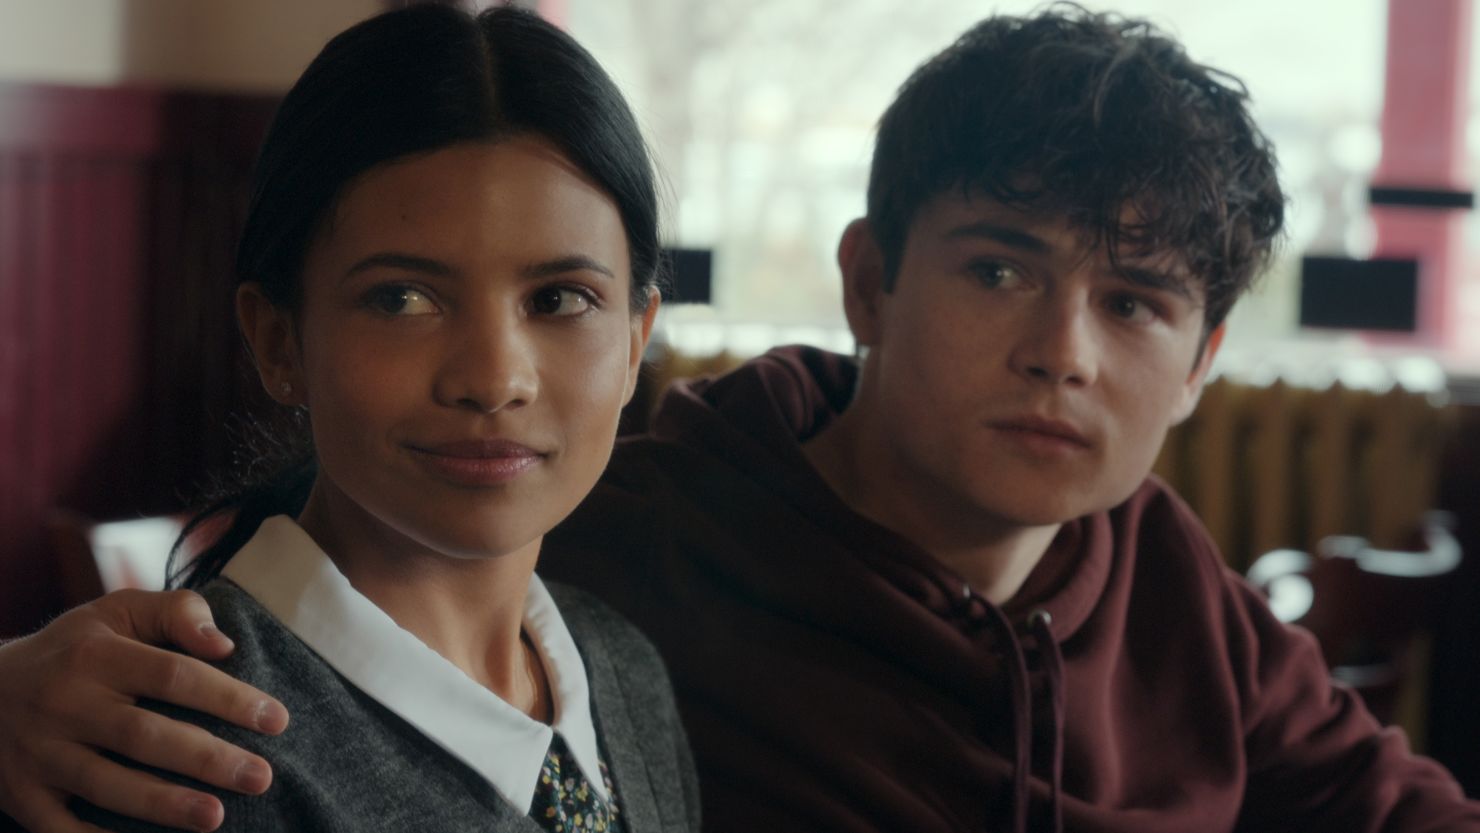 My Life With the Walter Boys' review: Netflix's teen drama wants to be 'The Summer I Turned Pretty, ' and probably will be